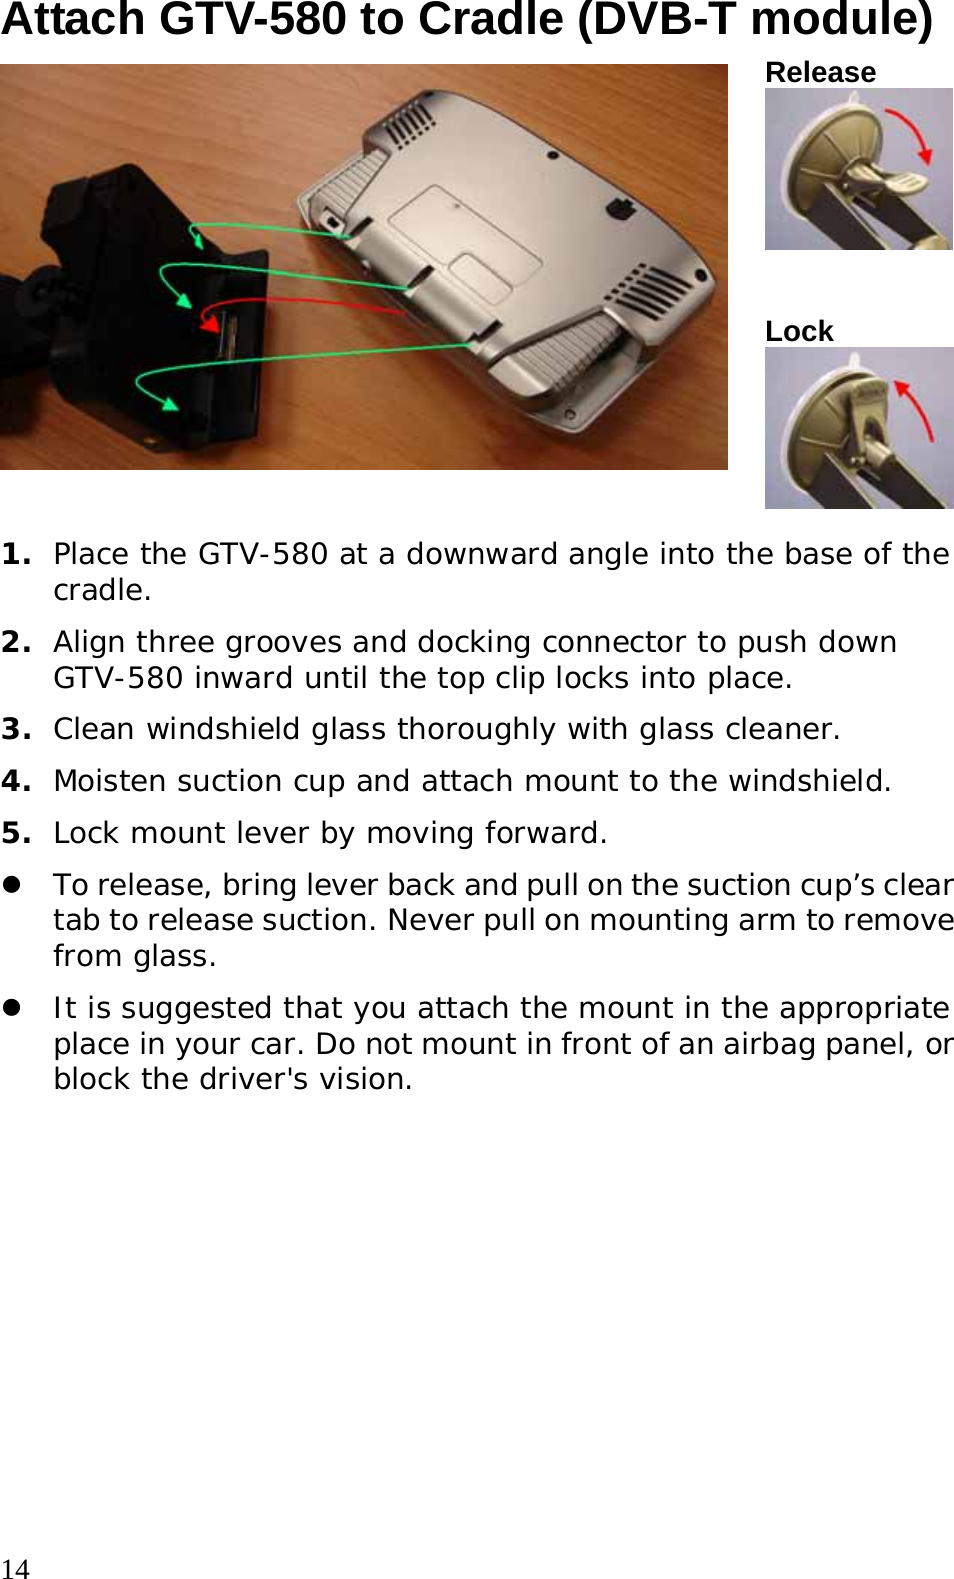  14 Attach GTV-580 to Cradle (DVB-T module) Release Lock 1.  Place the GTV-580 at a downward angle into the base of the cradle. 2.  Align three grooves and docking connector to push down GTV-580 inward until the top clip locks into place. 3.  Clean windshield glass thoroughly with glass cleaner. 4.  Moisten suction cup and attach mount to the windshield. 5.  Lock mount lever by moving forward.   z To release, bring lever back and pull on the suction cup’s clear tab to release suction. Never pull on mounting arm to remove from glass.  z It is suggested that you attach the mount in the appropriate place in your car. Do not mount in front of an airbag panel, or block the driver&apos;s vision.  